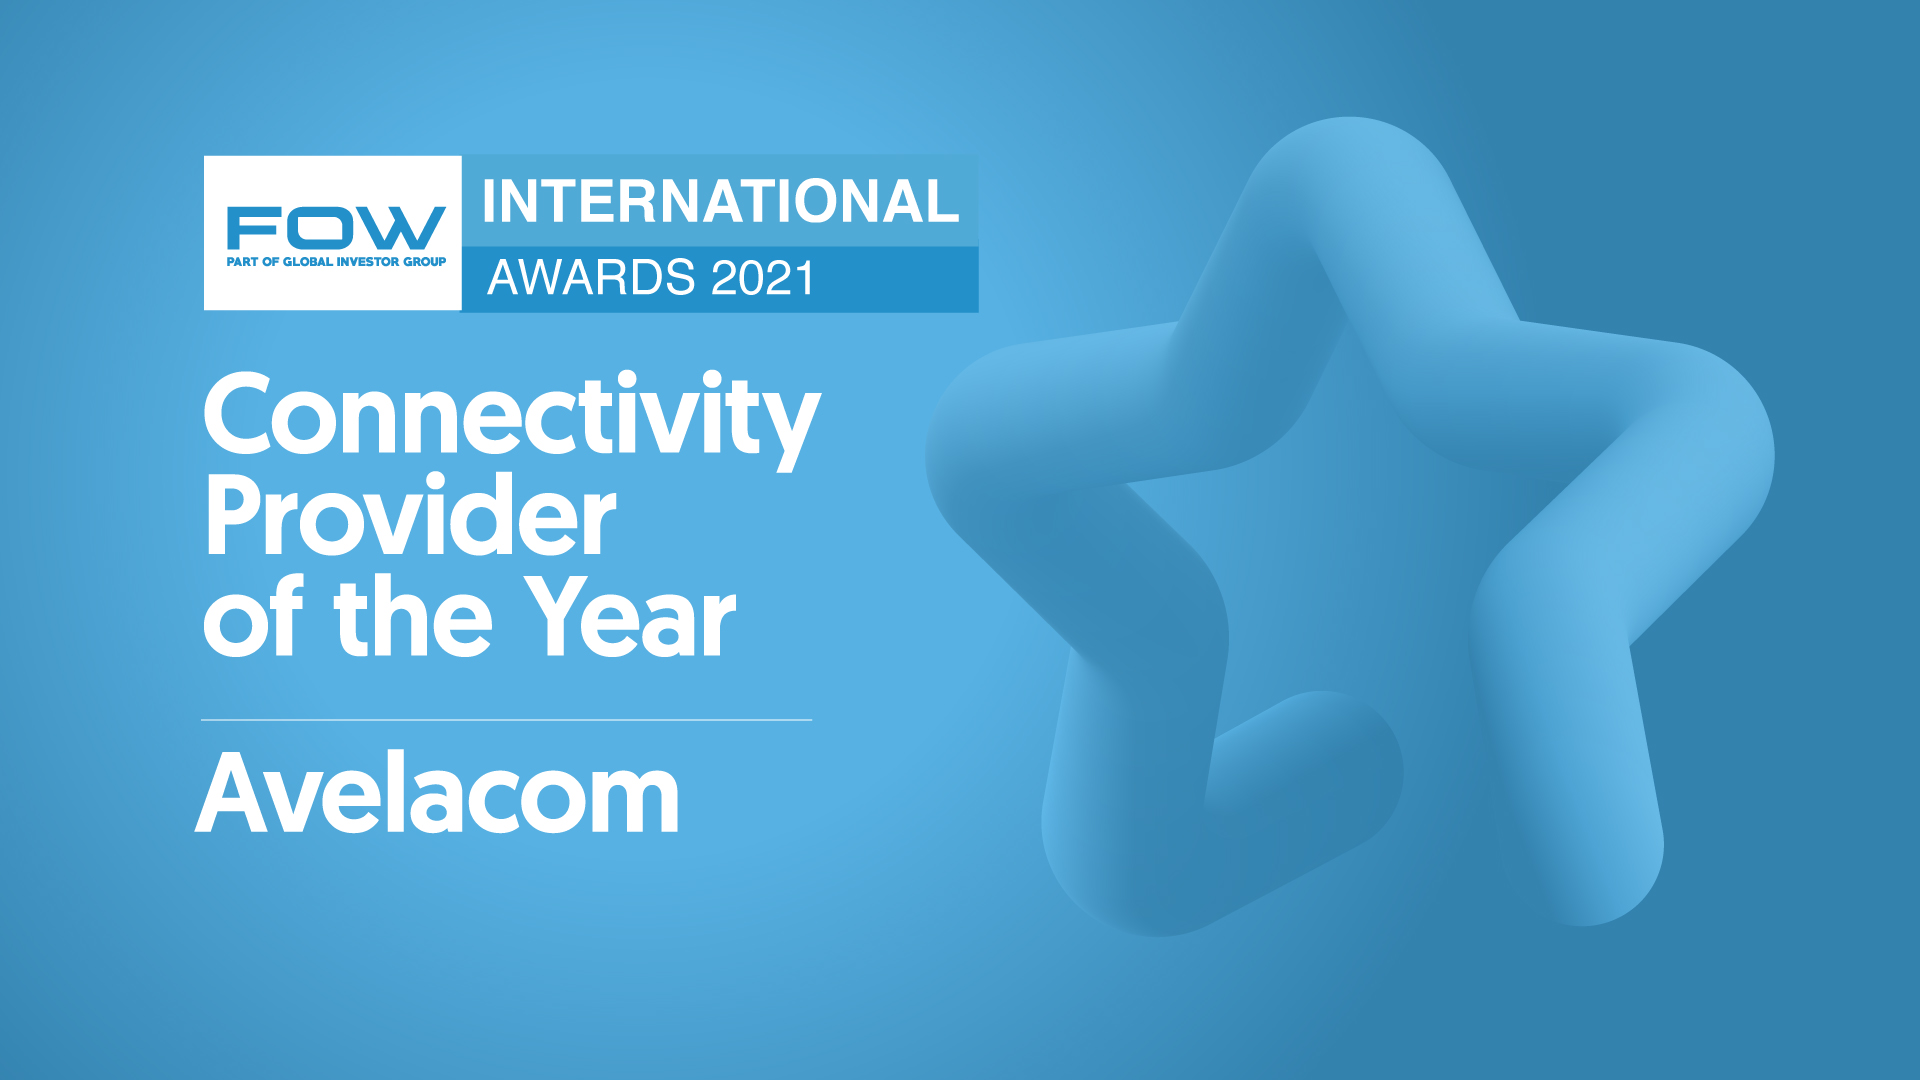 Avelacom wins “Connectivity Provider of the Year” in FOW/Global Investor International Awards 2021